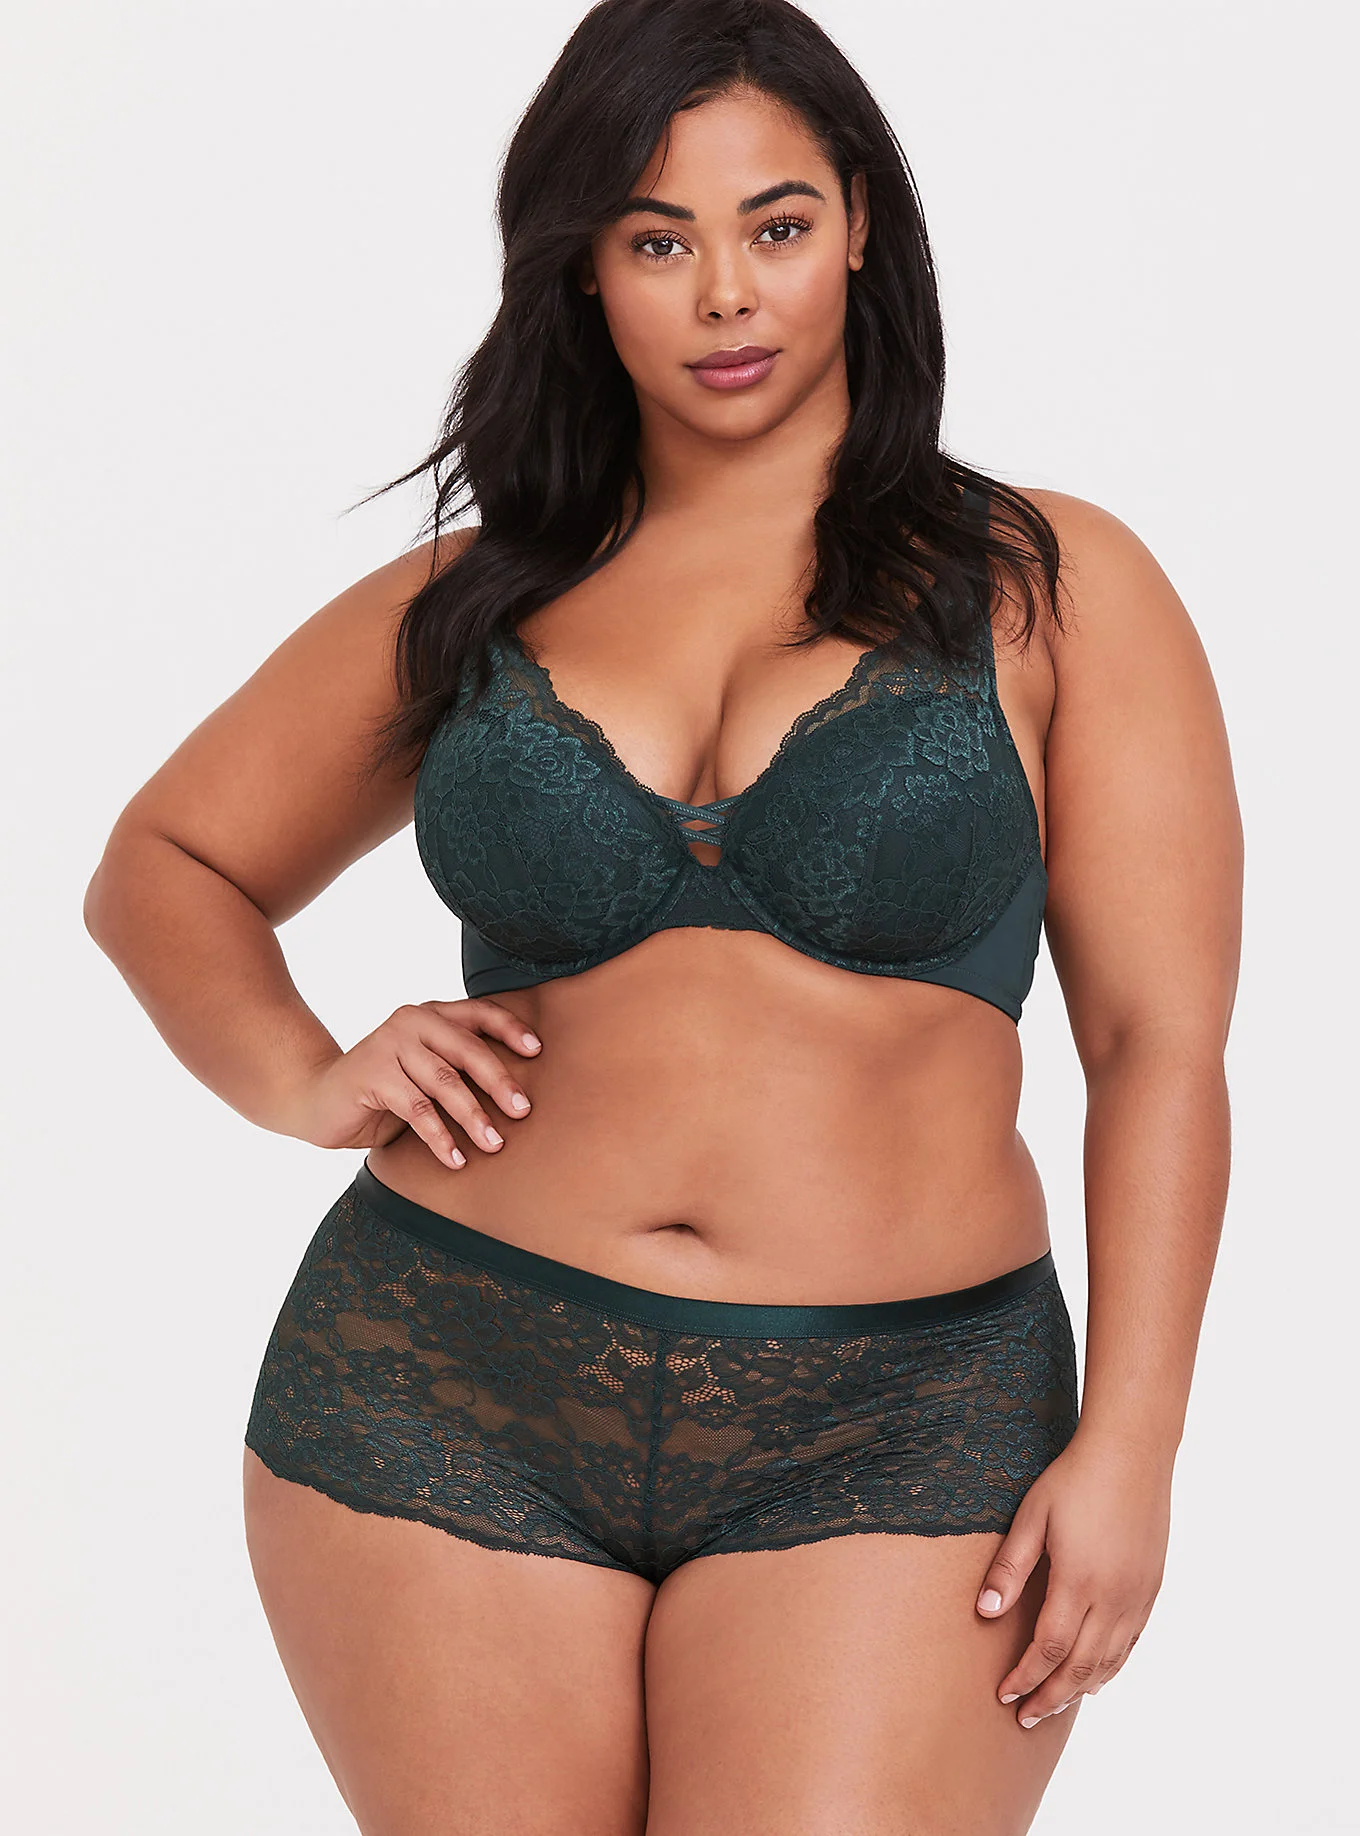 Torrid Curve + Lace Corset Push-Up Plunge Bra and Cheeky Panty